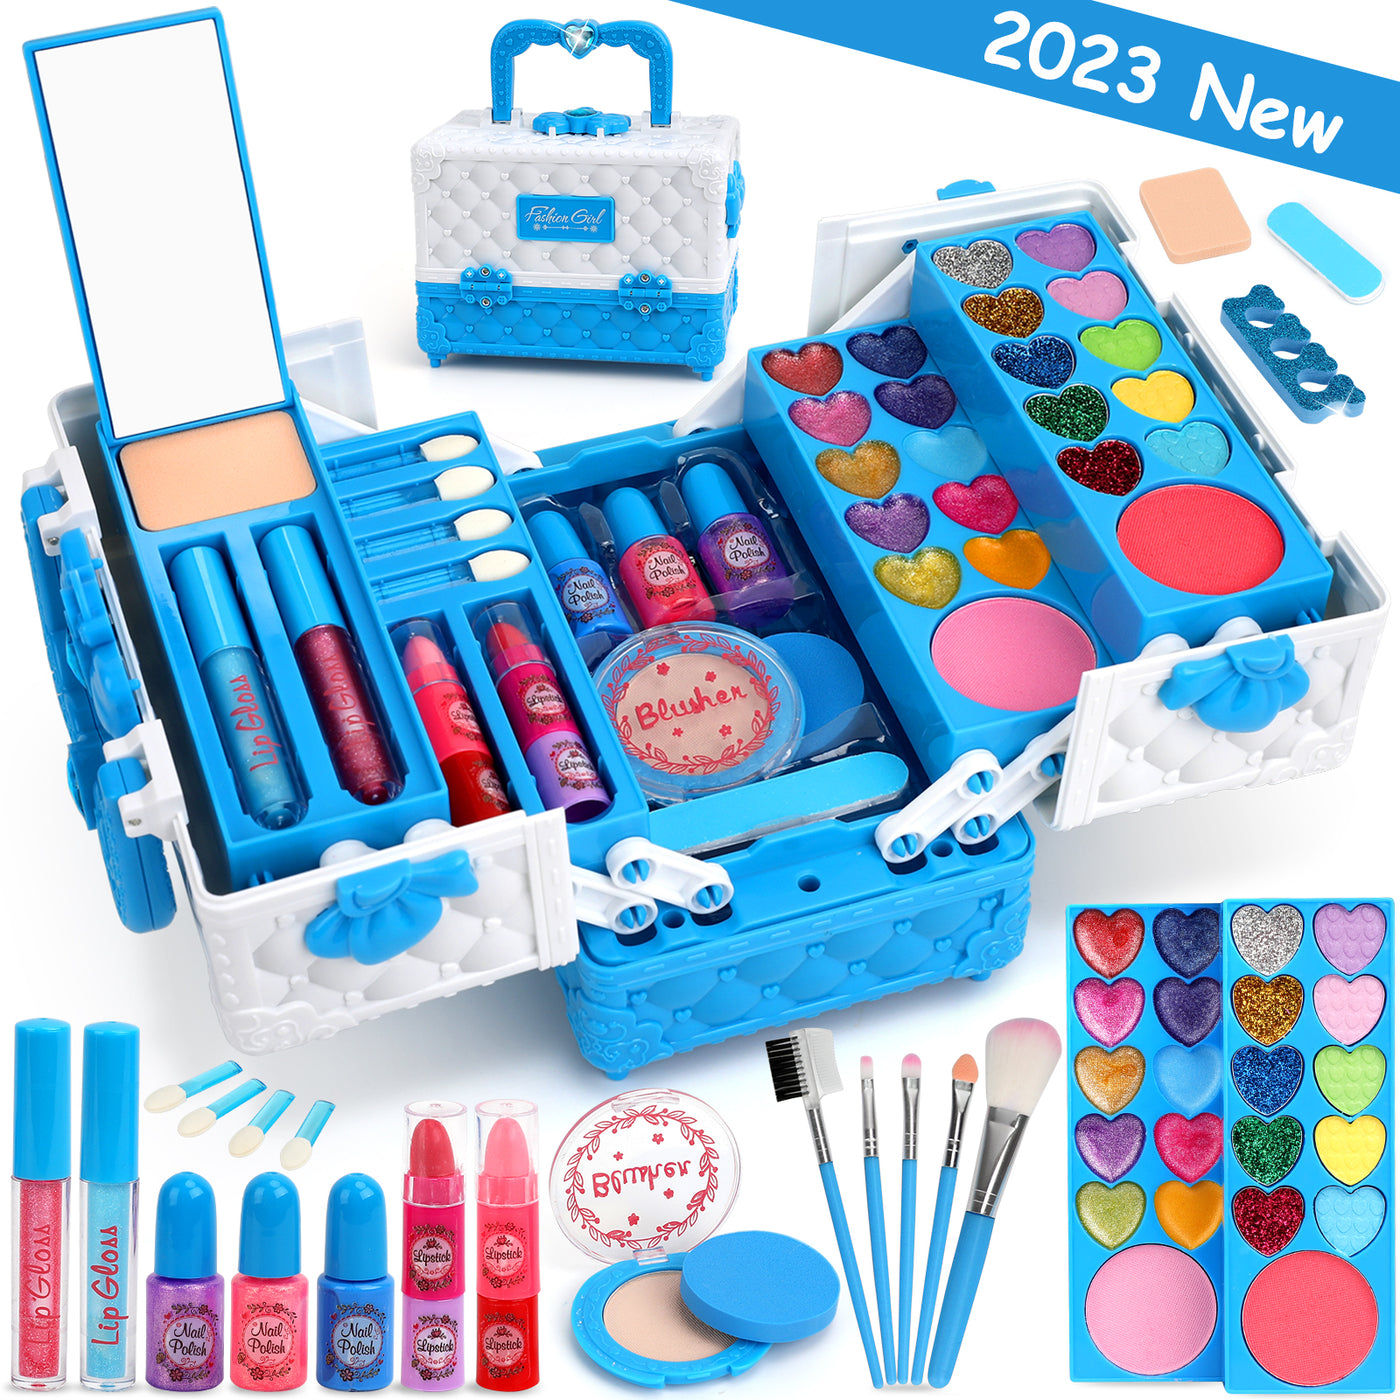  Flybay Kids Makeup Kit for Girl,Washable Real Frozen Make up  kit, Girl Toys for 4 5 6 7 8 9 Years Old Girl : Toys & Games